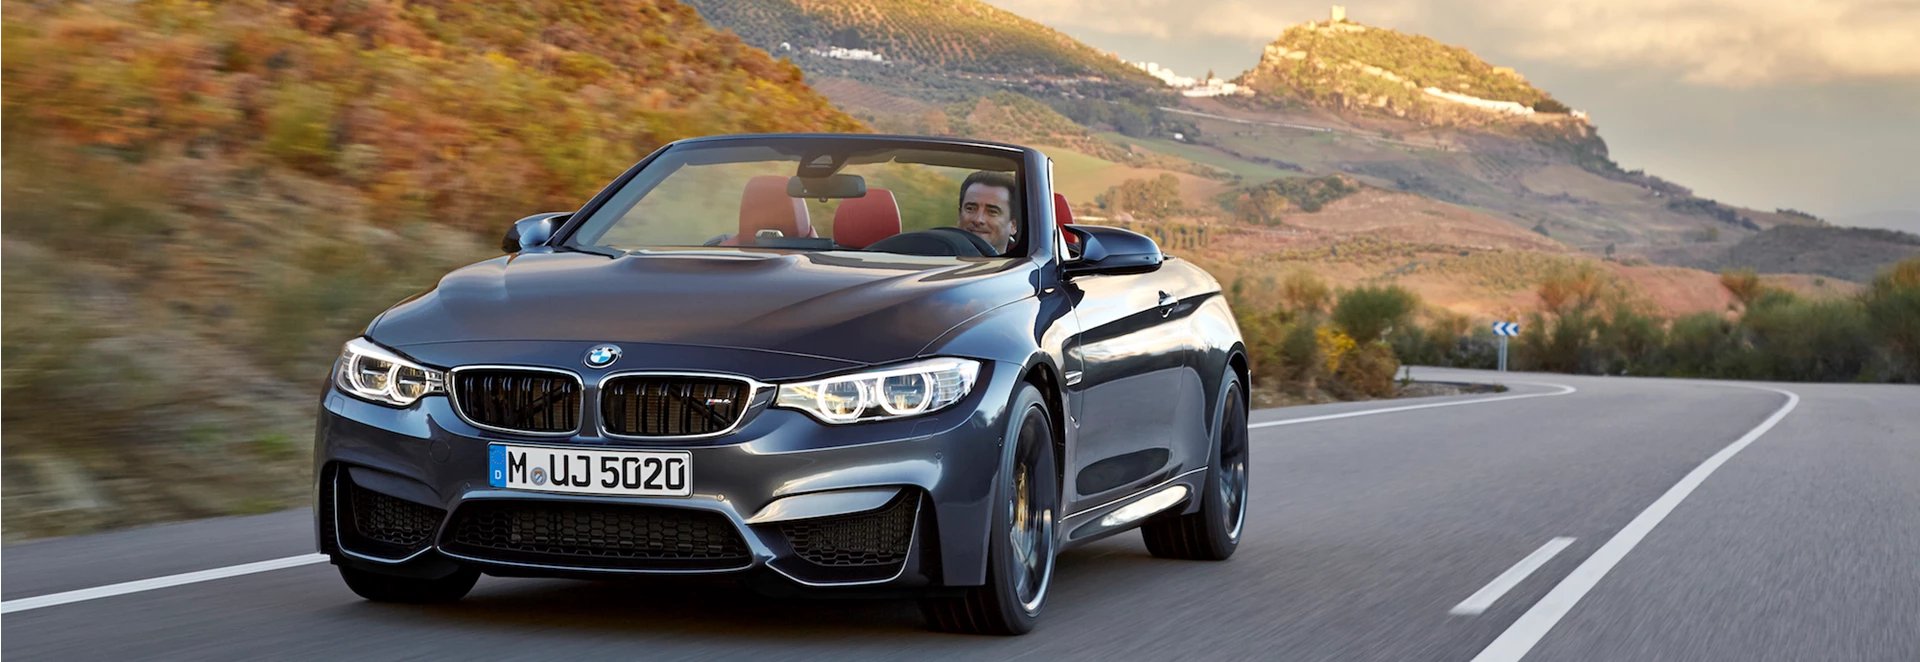 2018 BMW M4 Convertible review